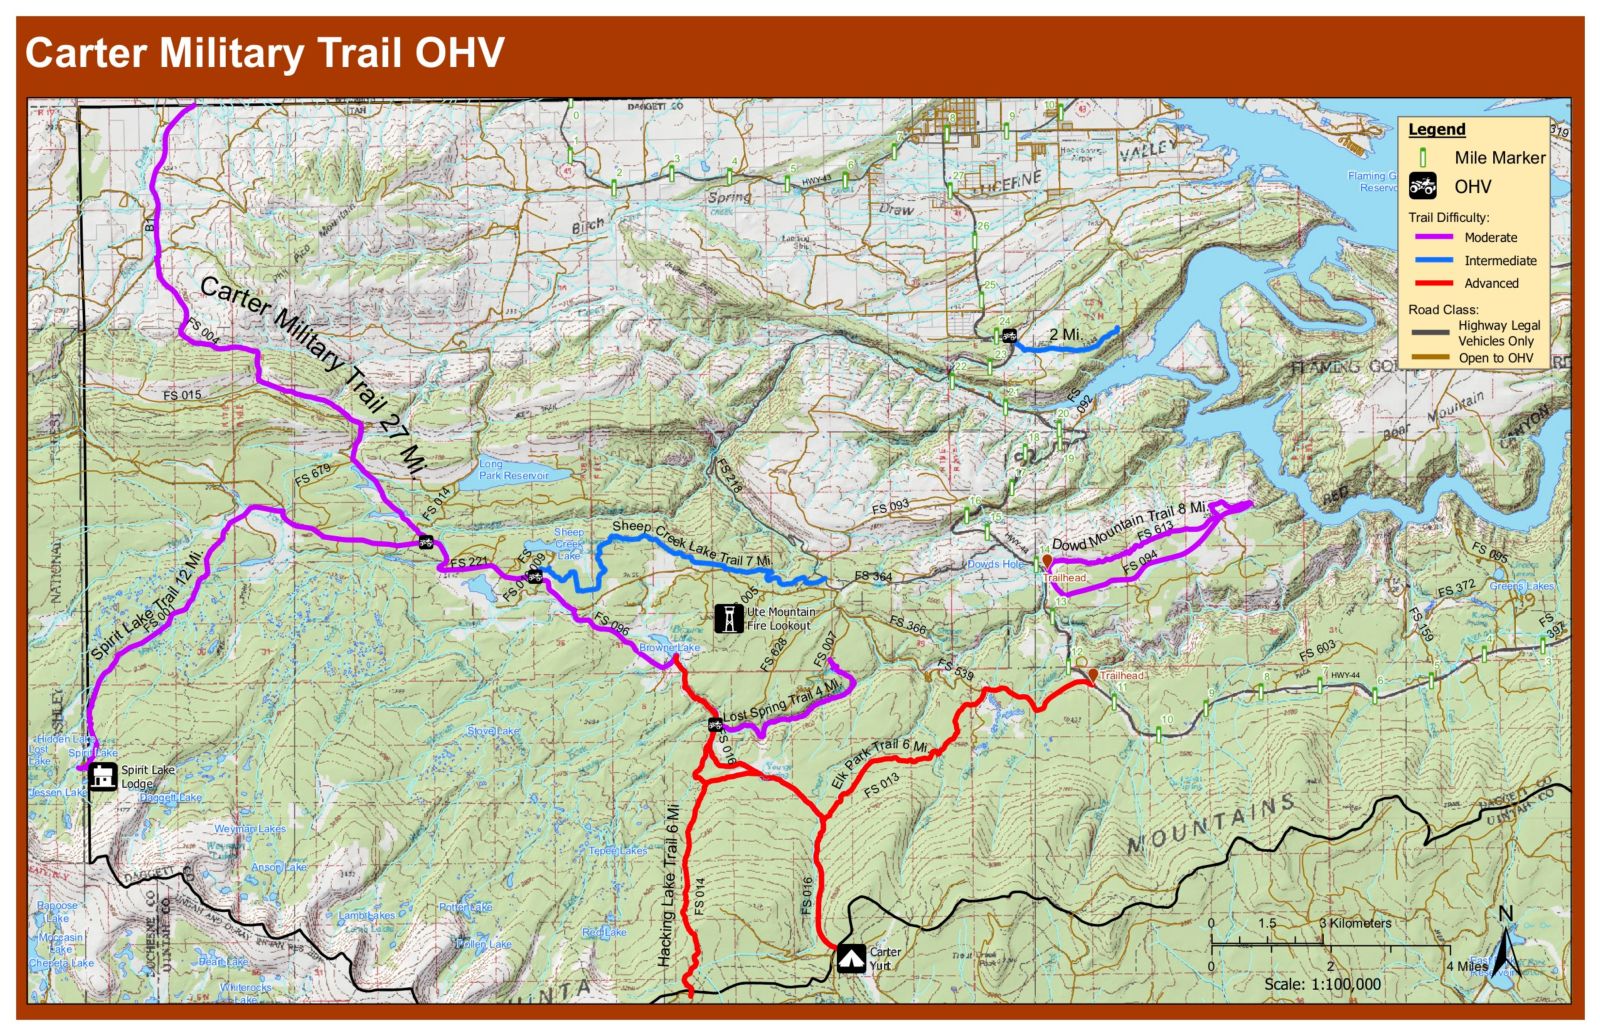 Carter Military Trail OHV Map Flaming Gorge